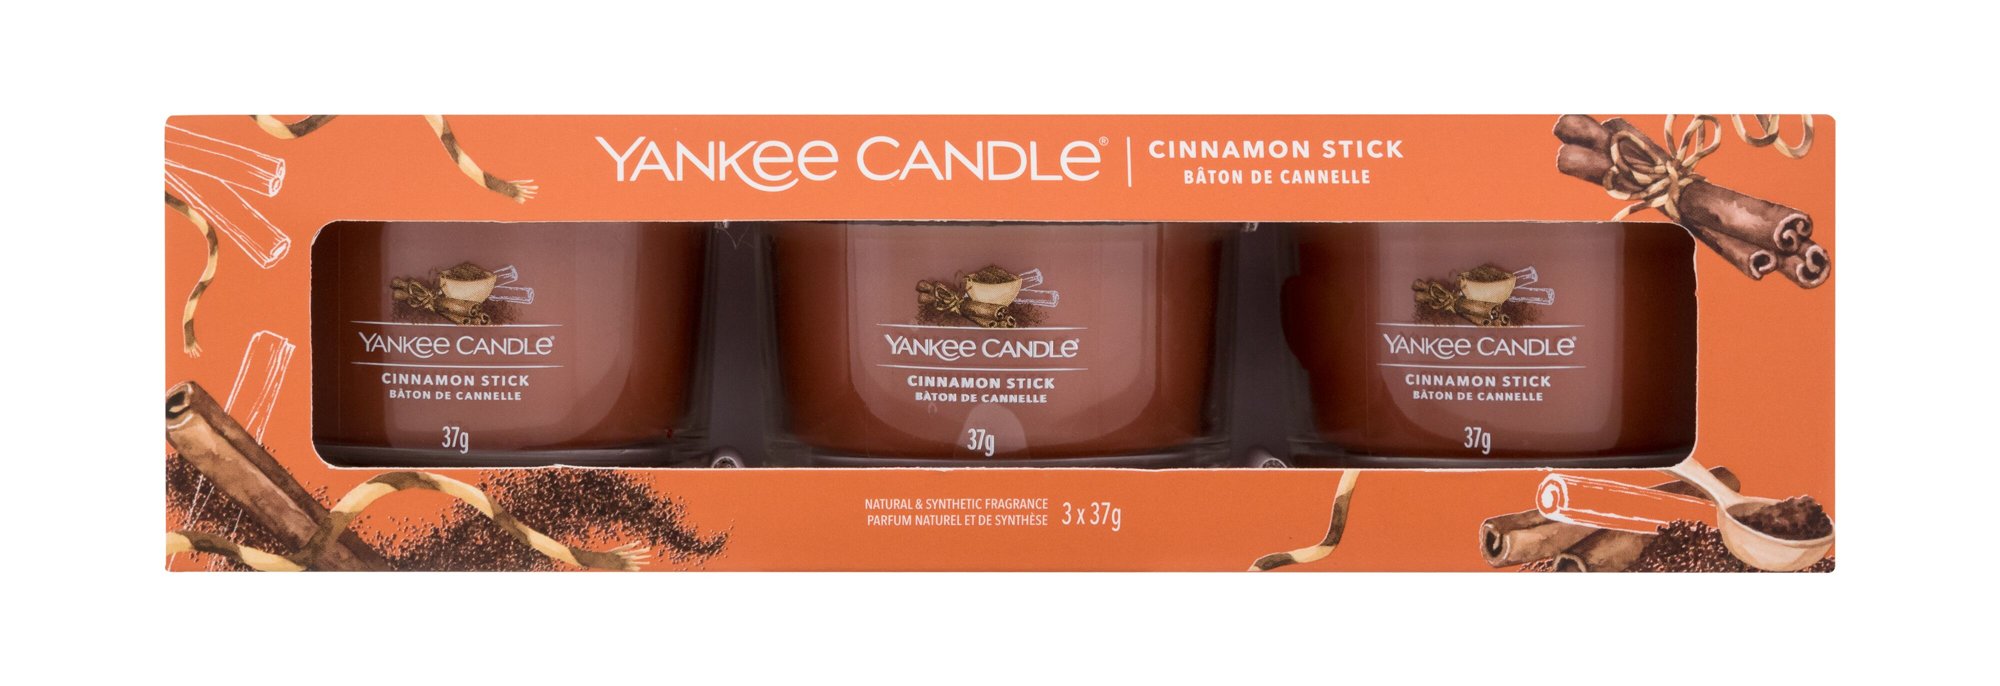 Yankee Candle Cinnamon Stick 37g Scented Candle 3 x 37 g Kvepalai Unisex Scented Candle Rinkinys